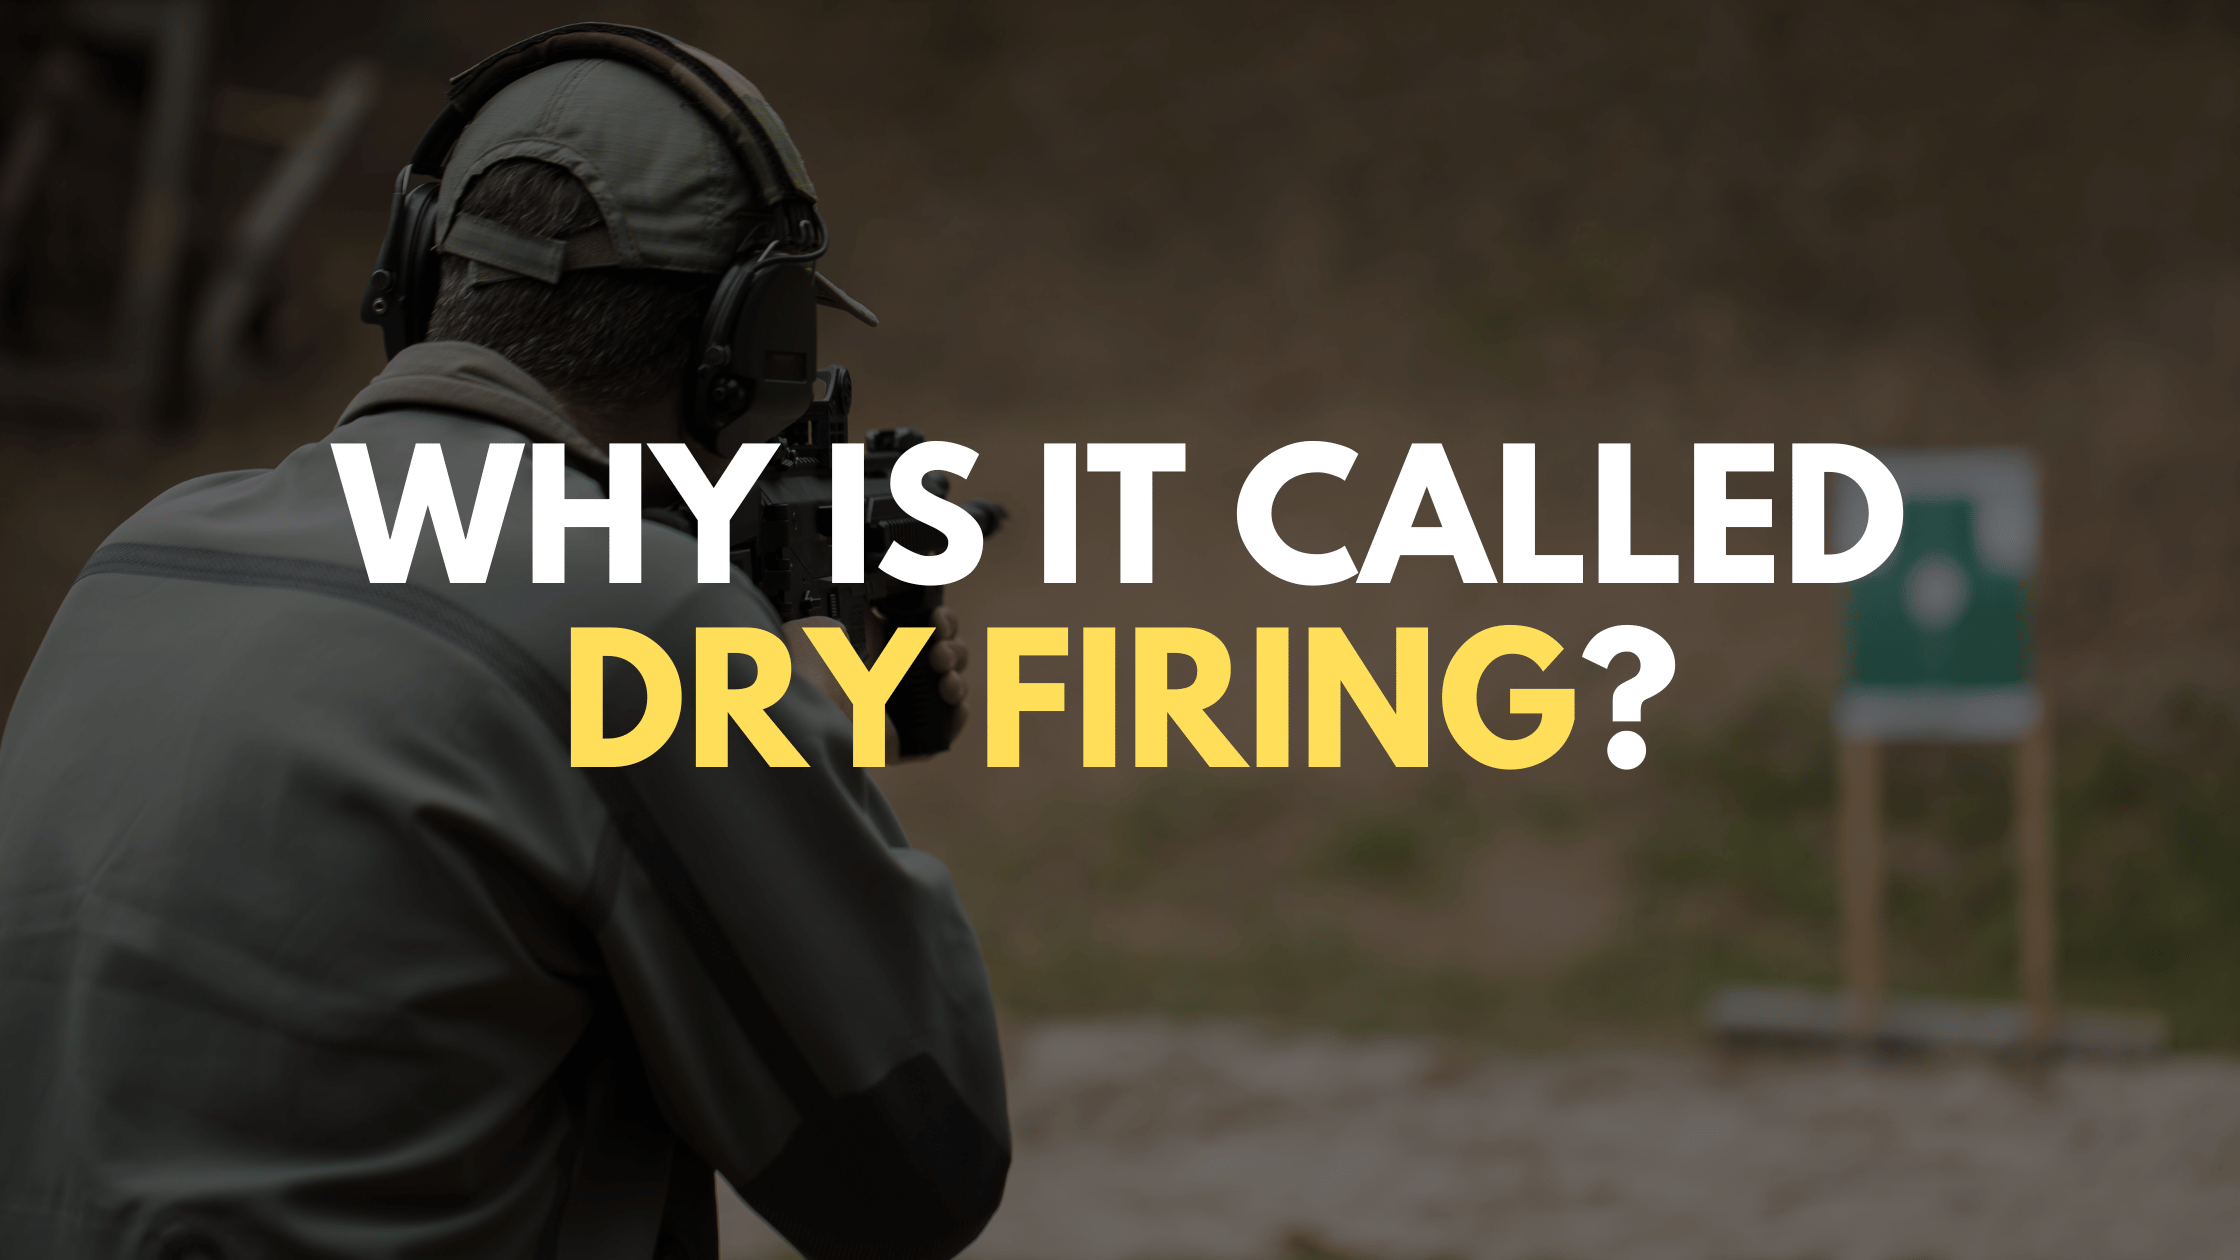 Why is it called dry firing?